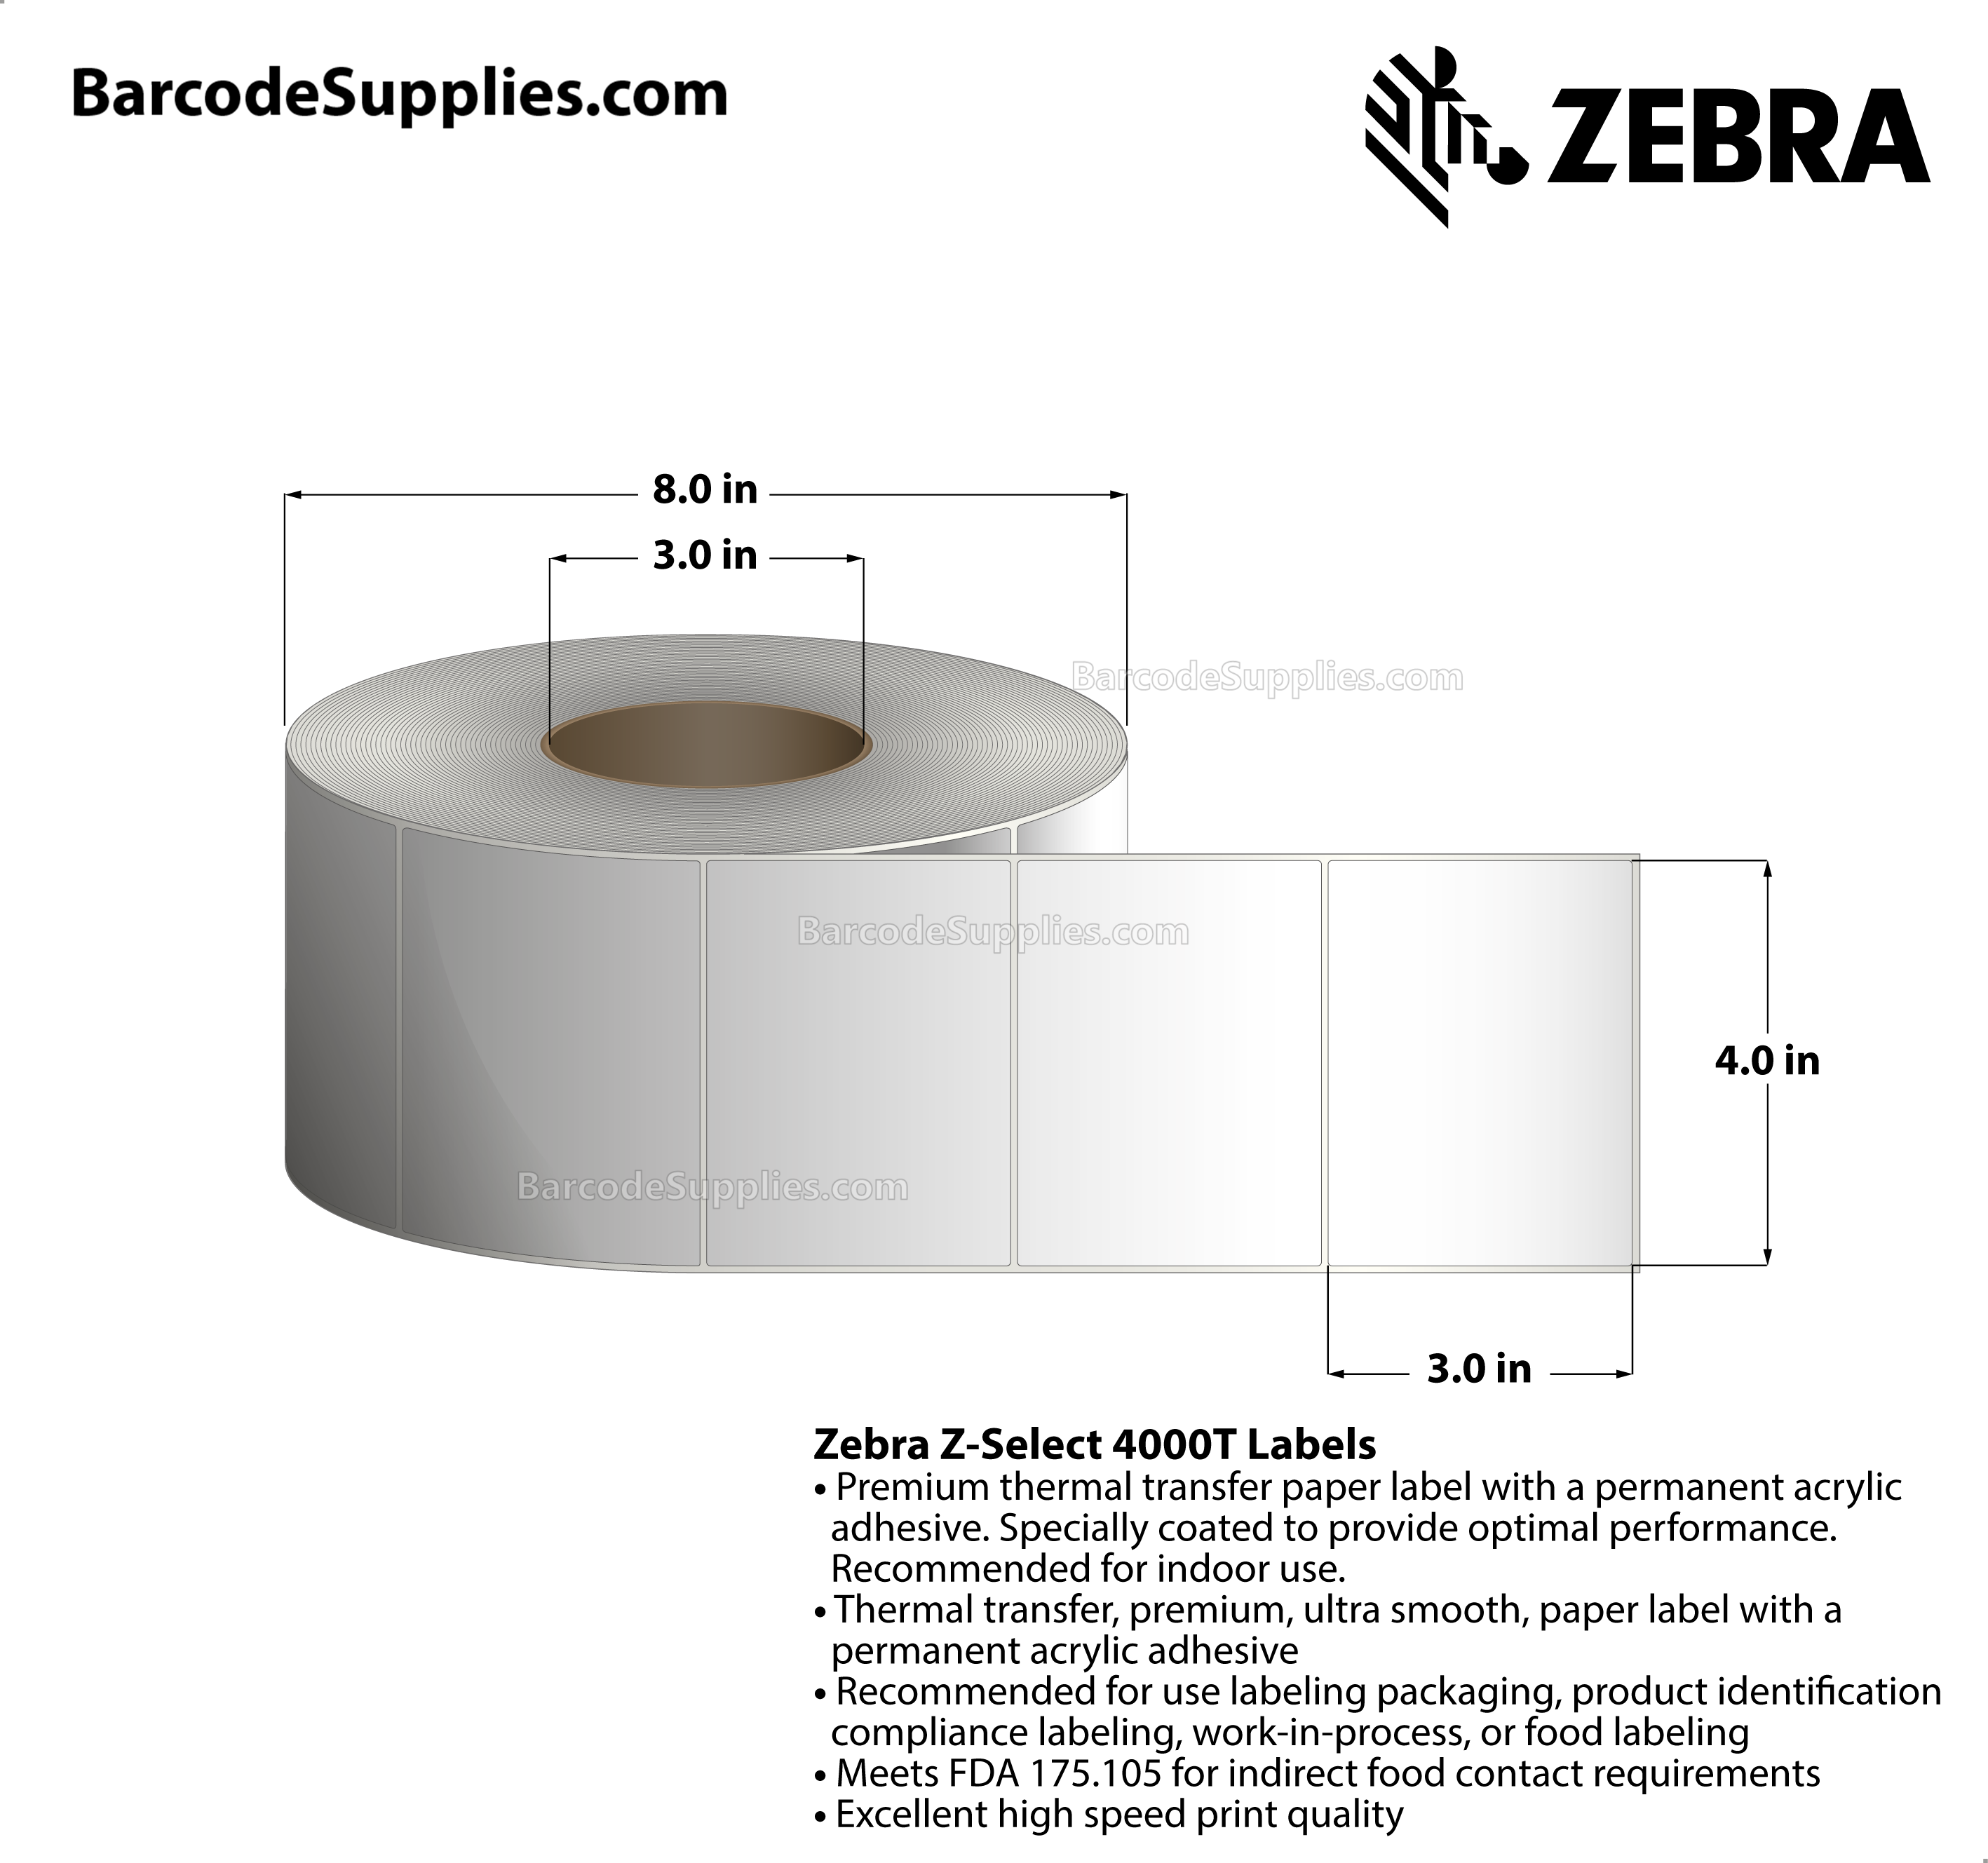 Products 4 x 3 Thermal Transfer White Z-Select 4000T Labels With Permanent Adhesive - Not Perforated - 1870 Labels Per Roll - Carton Of 4 Rolls - 7480 Labels Total - MPN: 72291